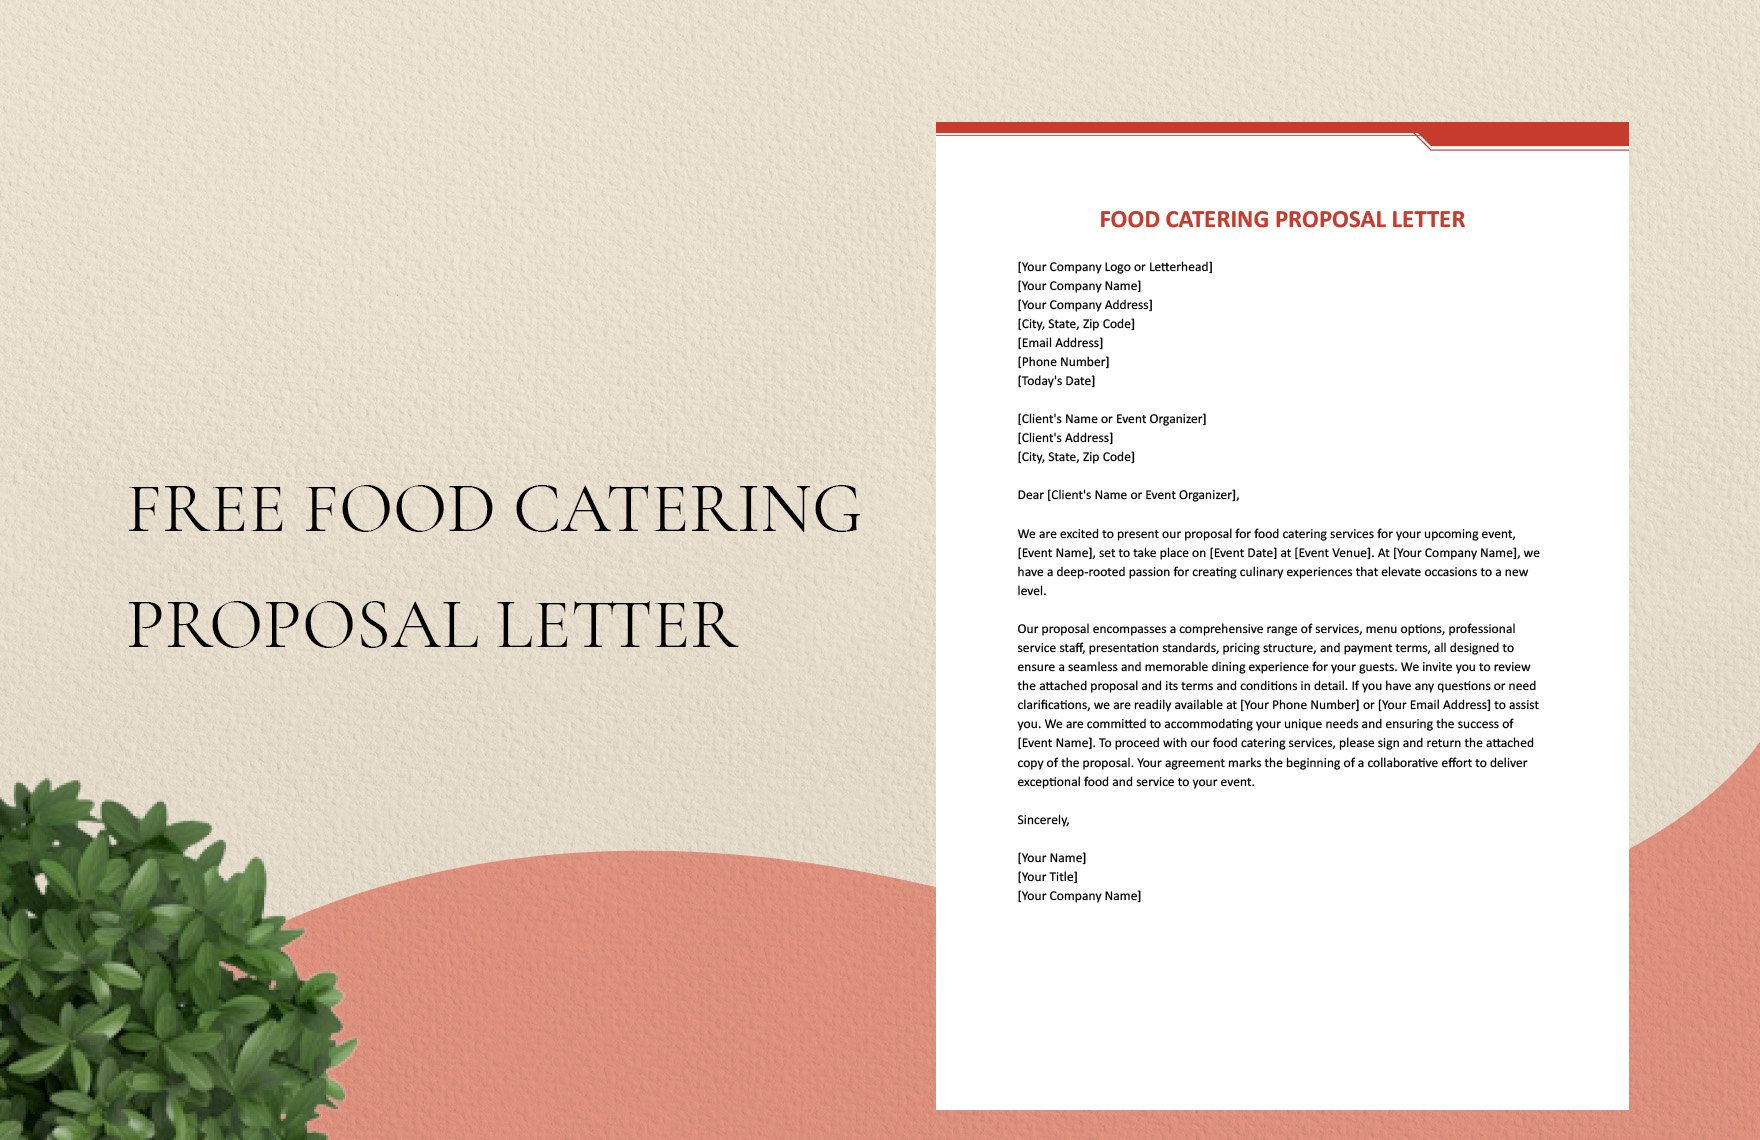 Food Catering Proposal Letter